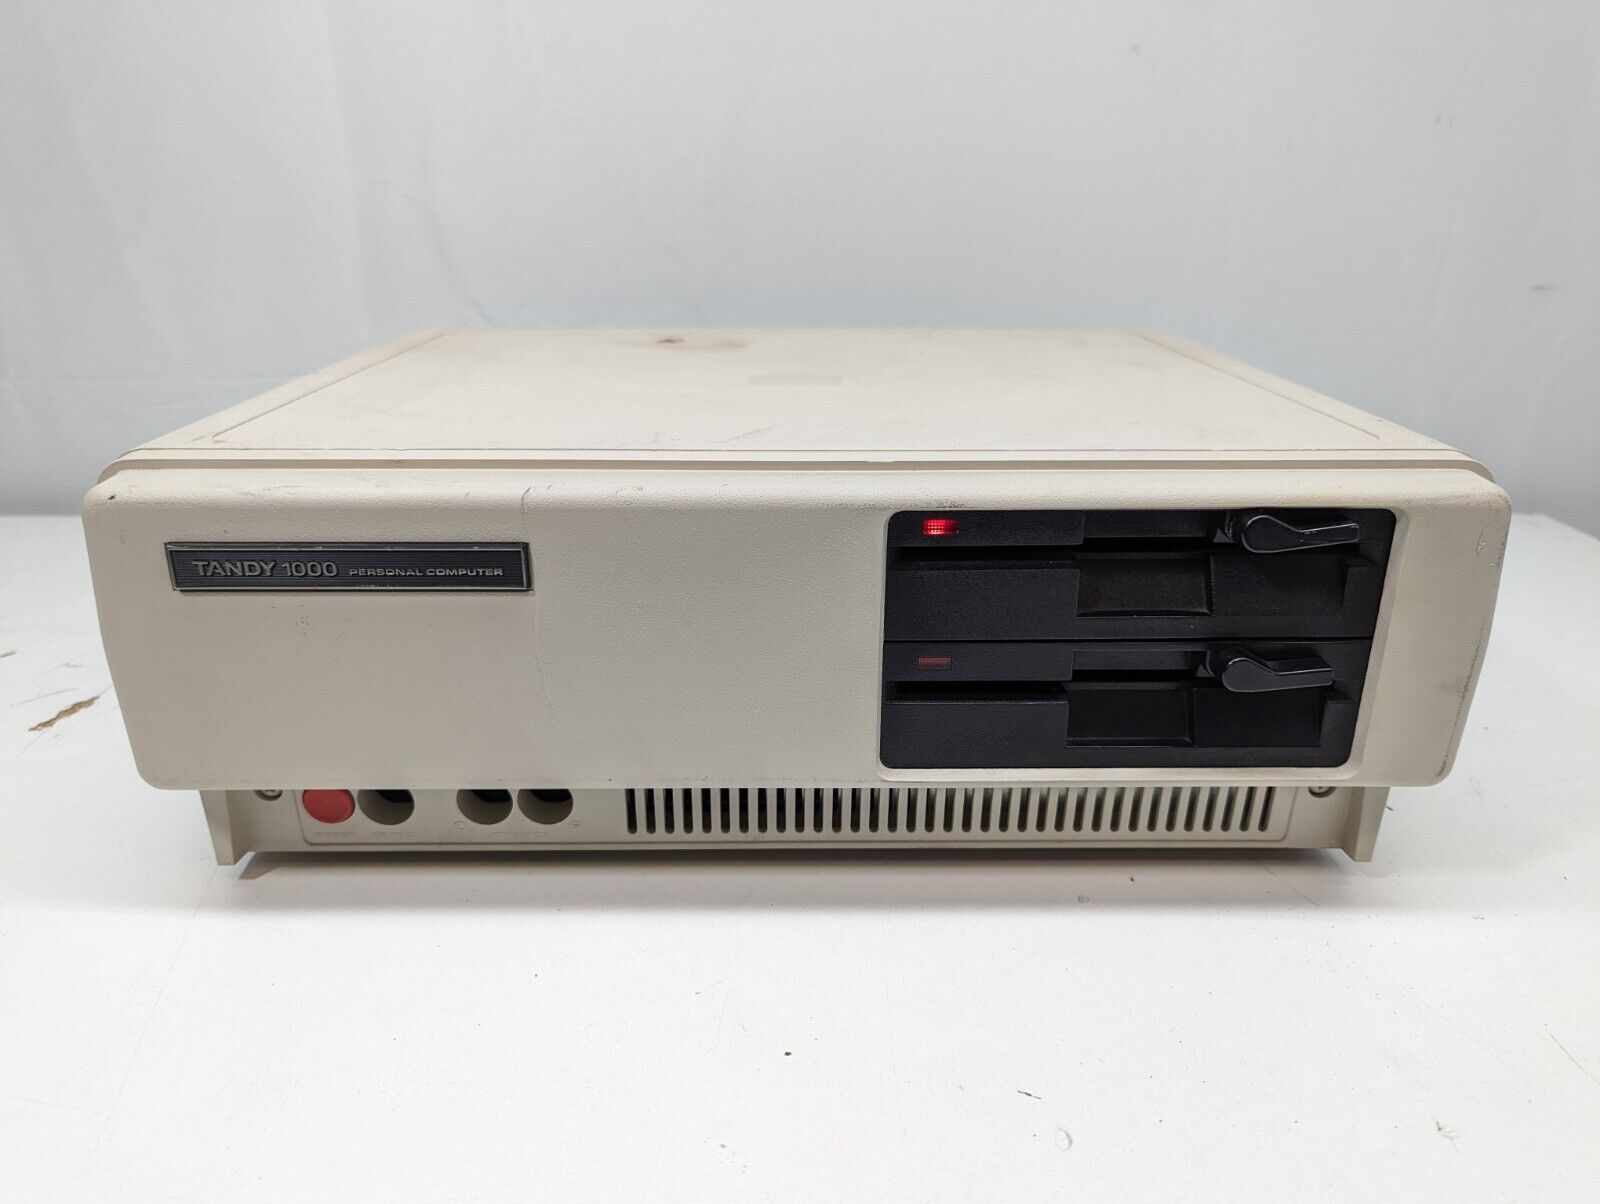 Vintage Tandy 1000 Personal Computer Model 25-1000 - Powers on